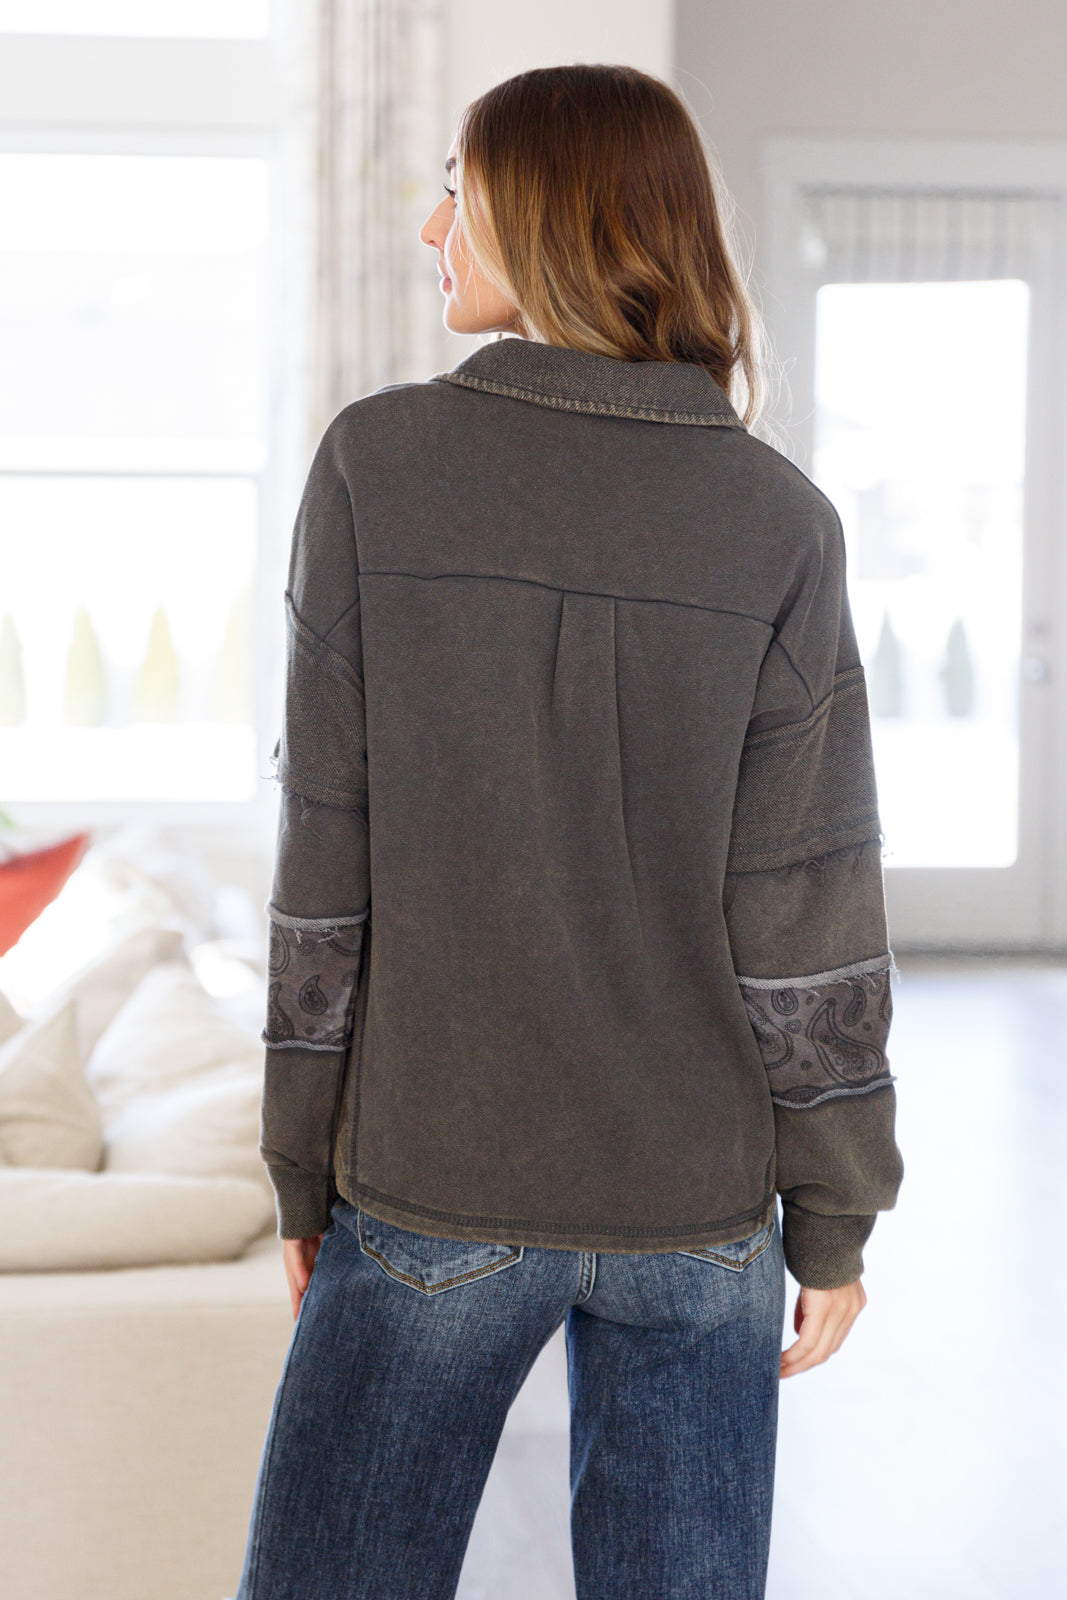 Made from soft French Terry fabric and featuring a trendy collared V-neck, this warm and easy-to-style pullover will quickly become a staple in your closet.